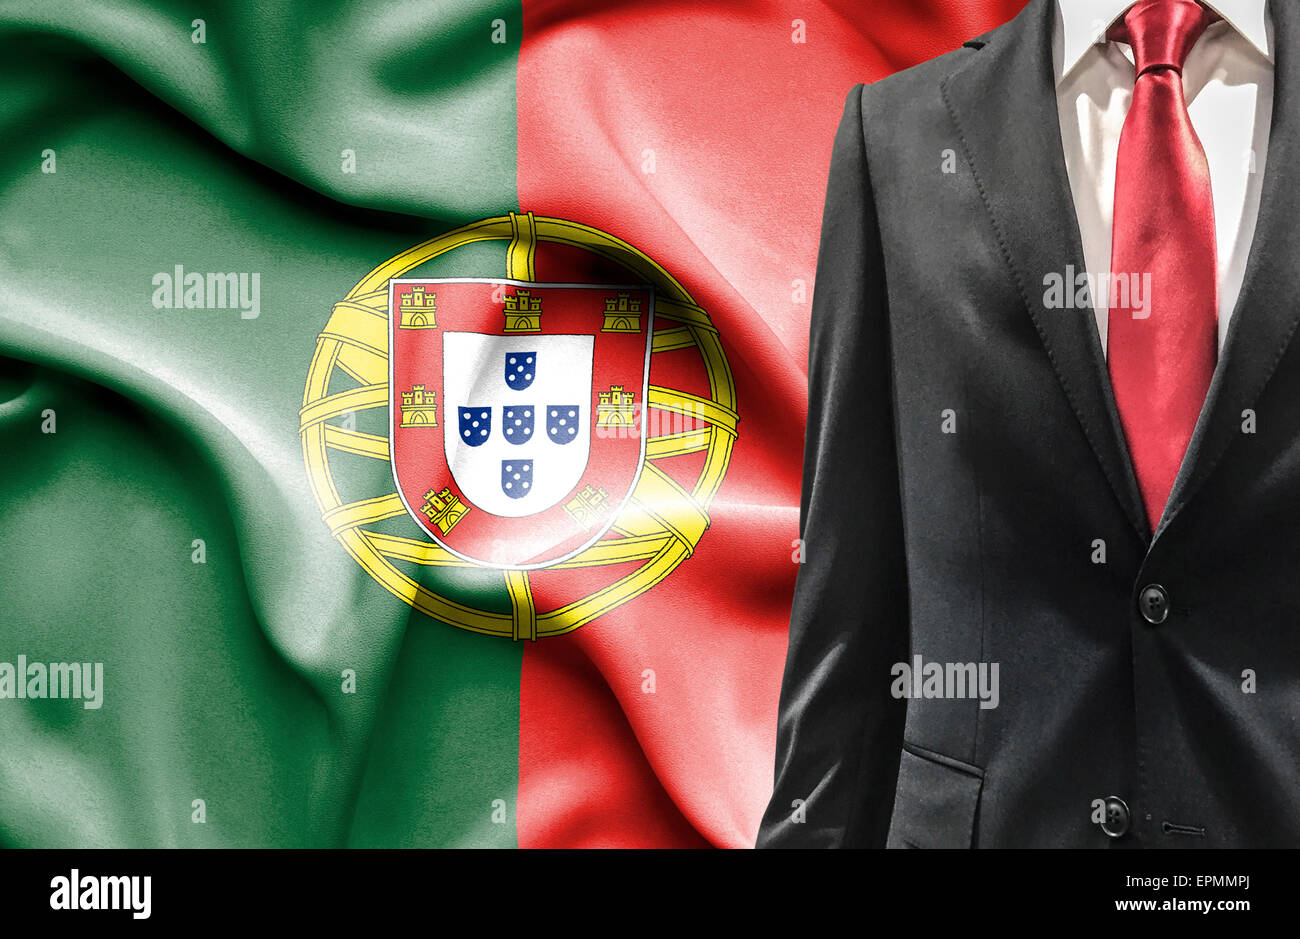 Man in suit from Portugal Stock Photo